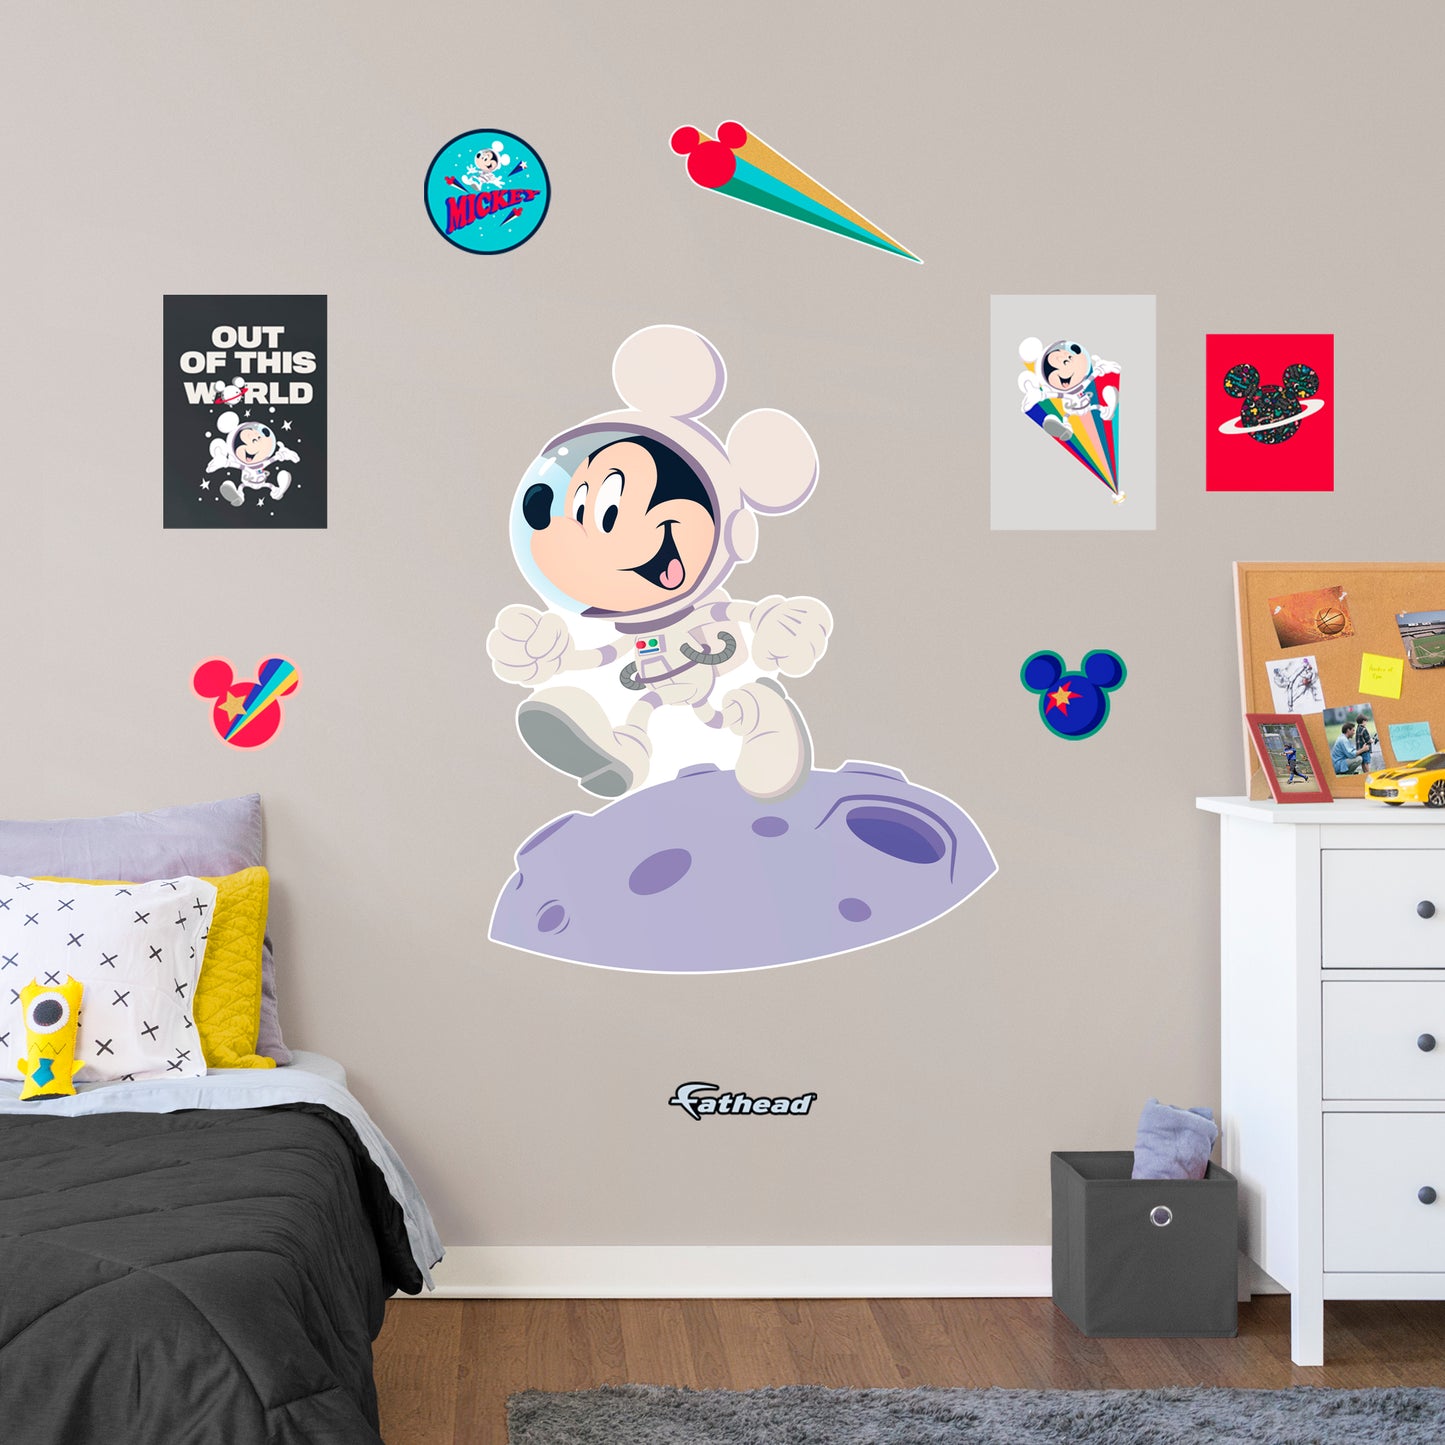 Giant Character + 9 Decals (38"W x 49"H)